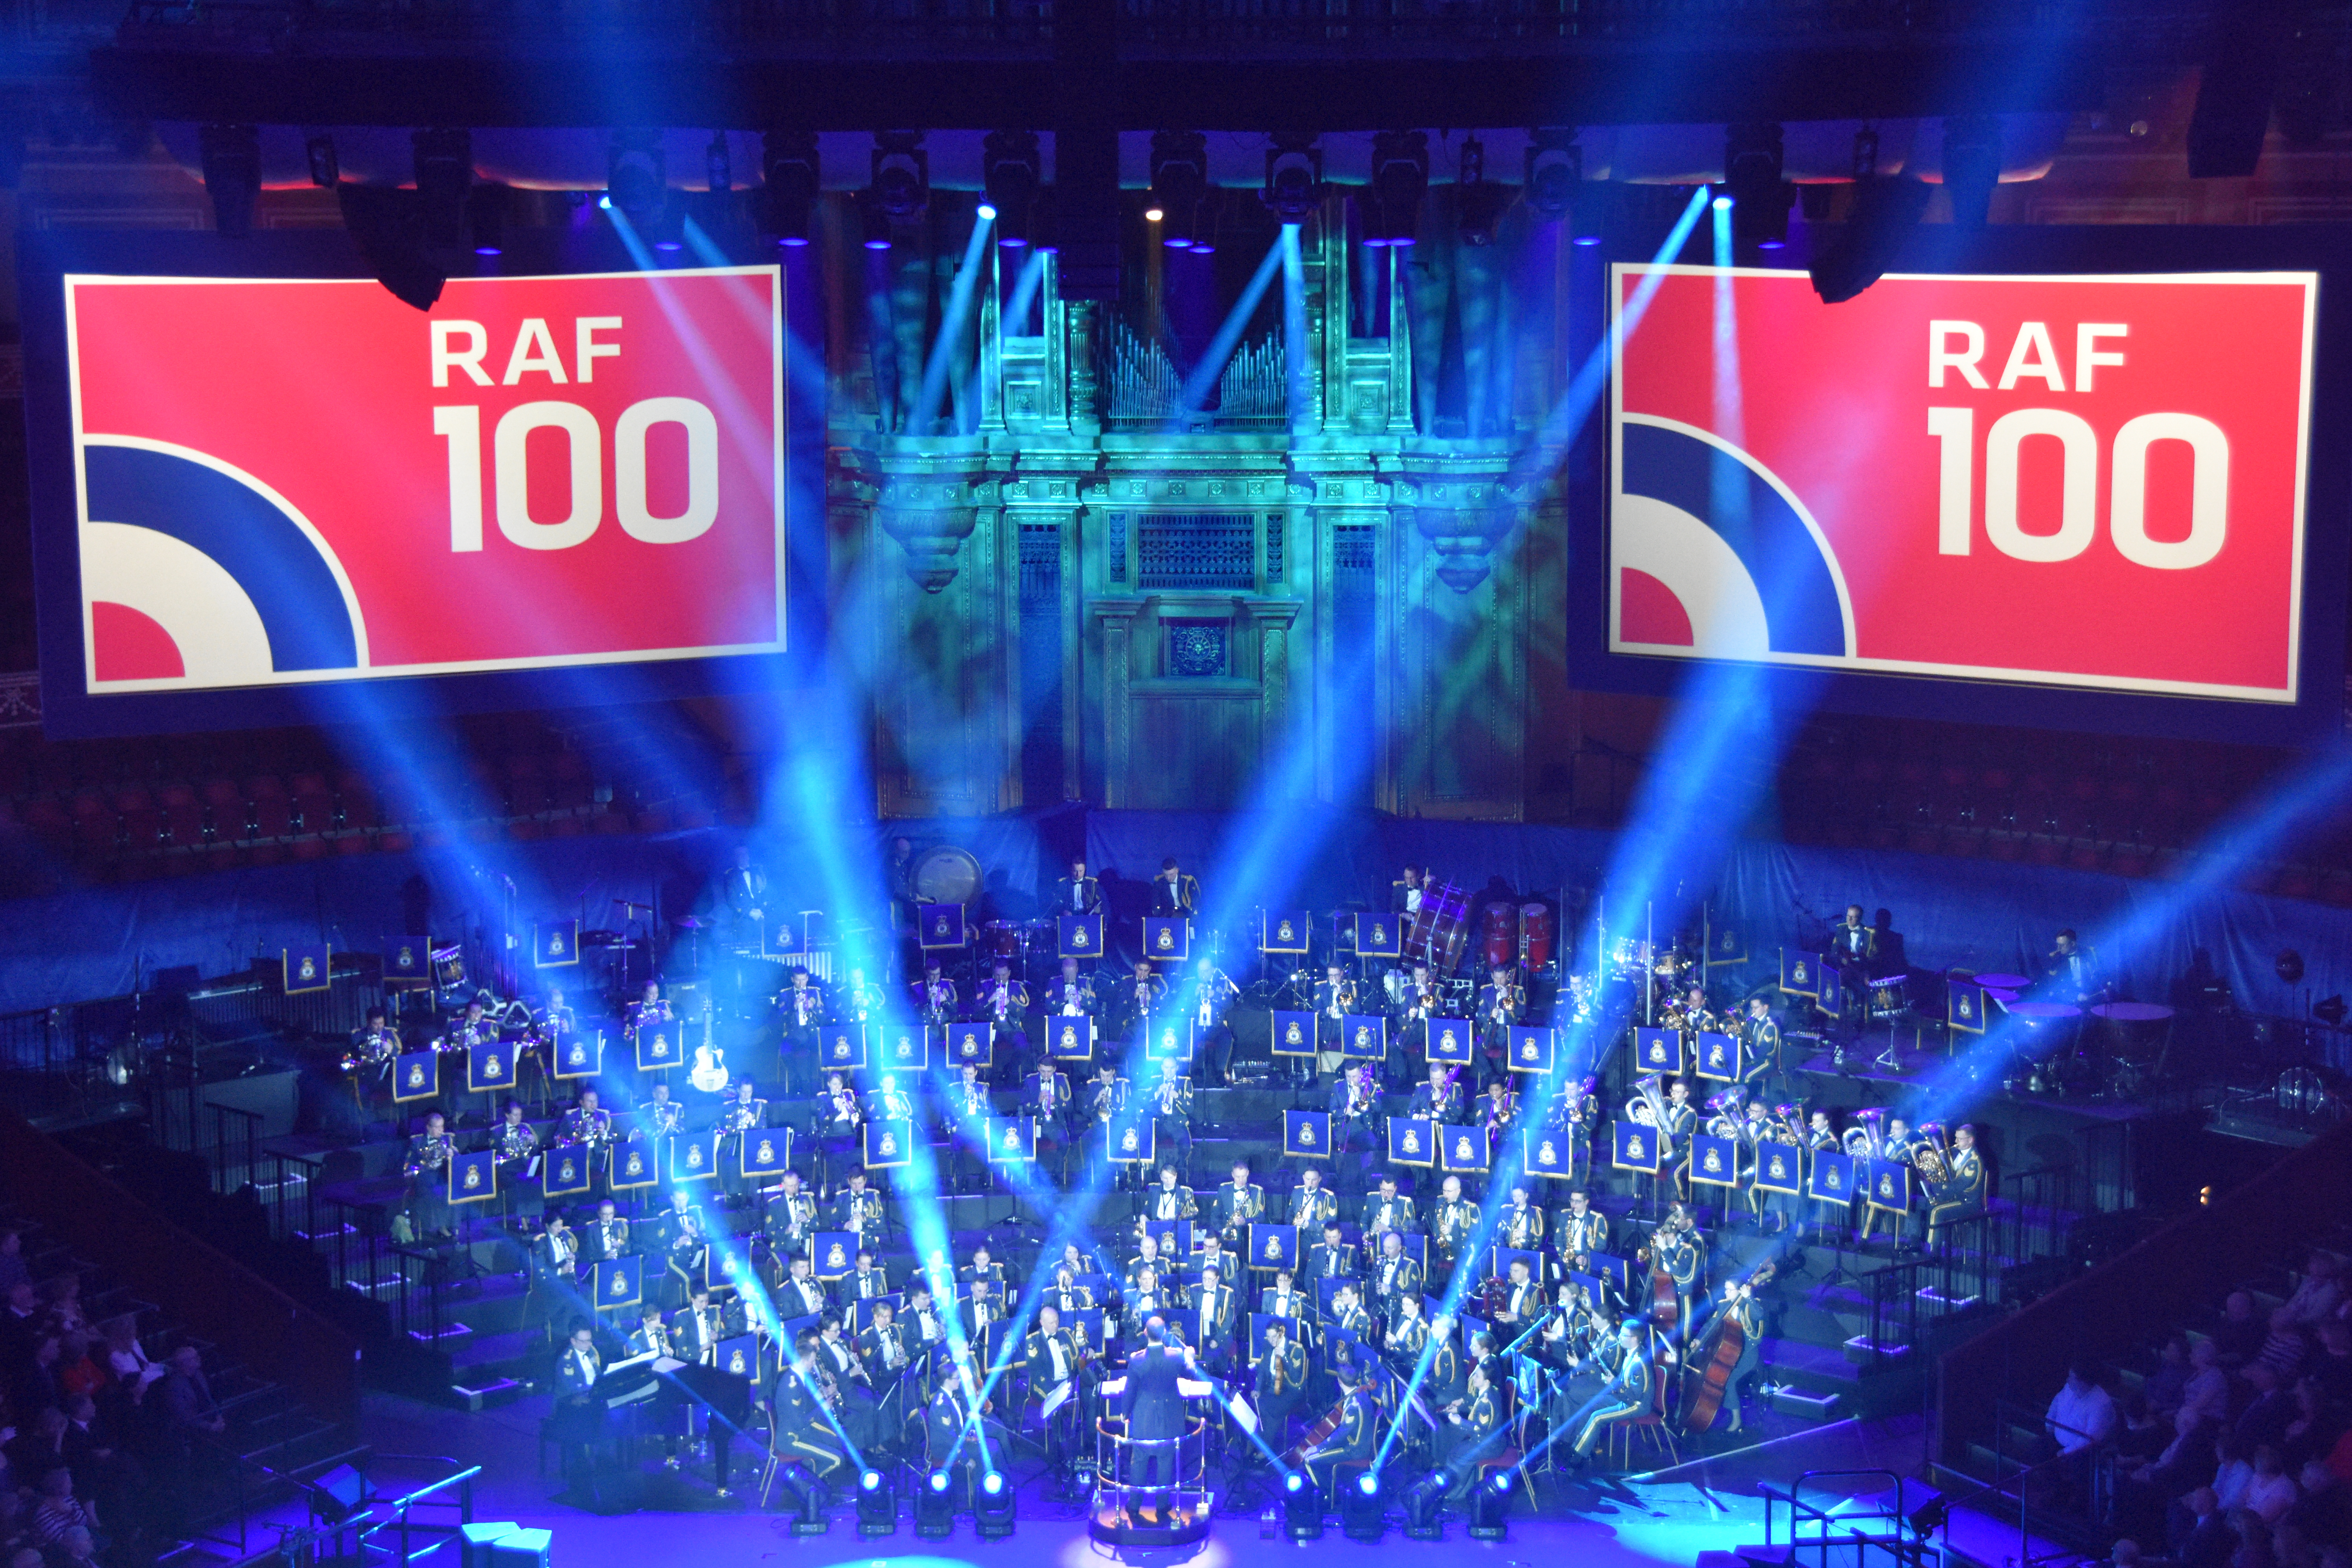 Wing Commander Piers Morrell leading the Massed Bands of the RAF in the RAF100 concert at the Royal Albert Hall